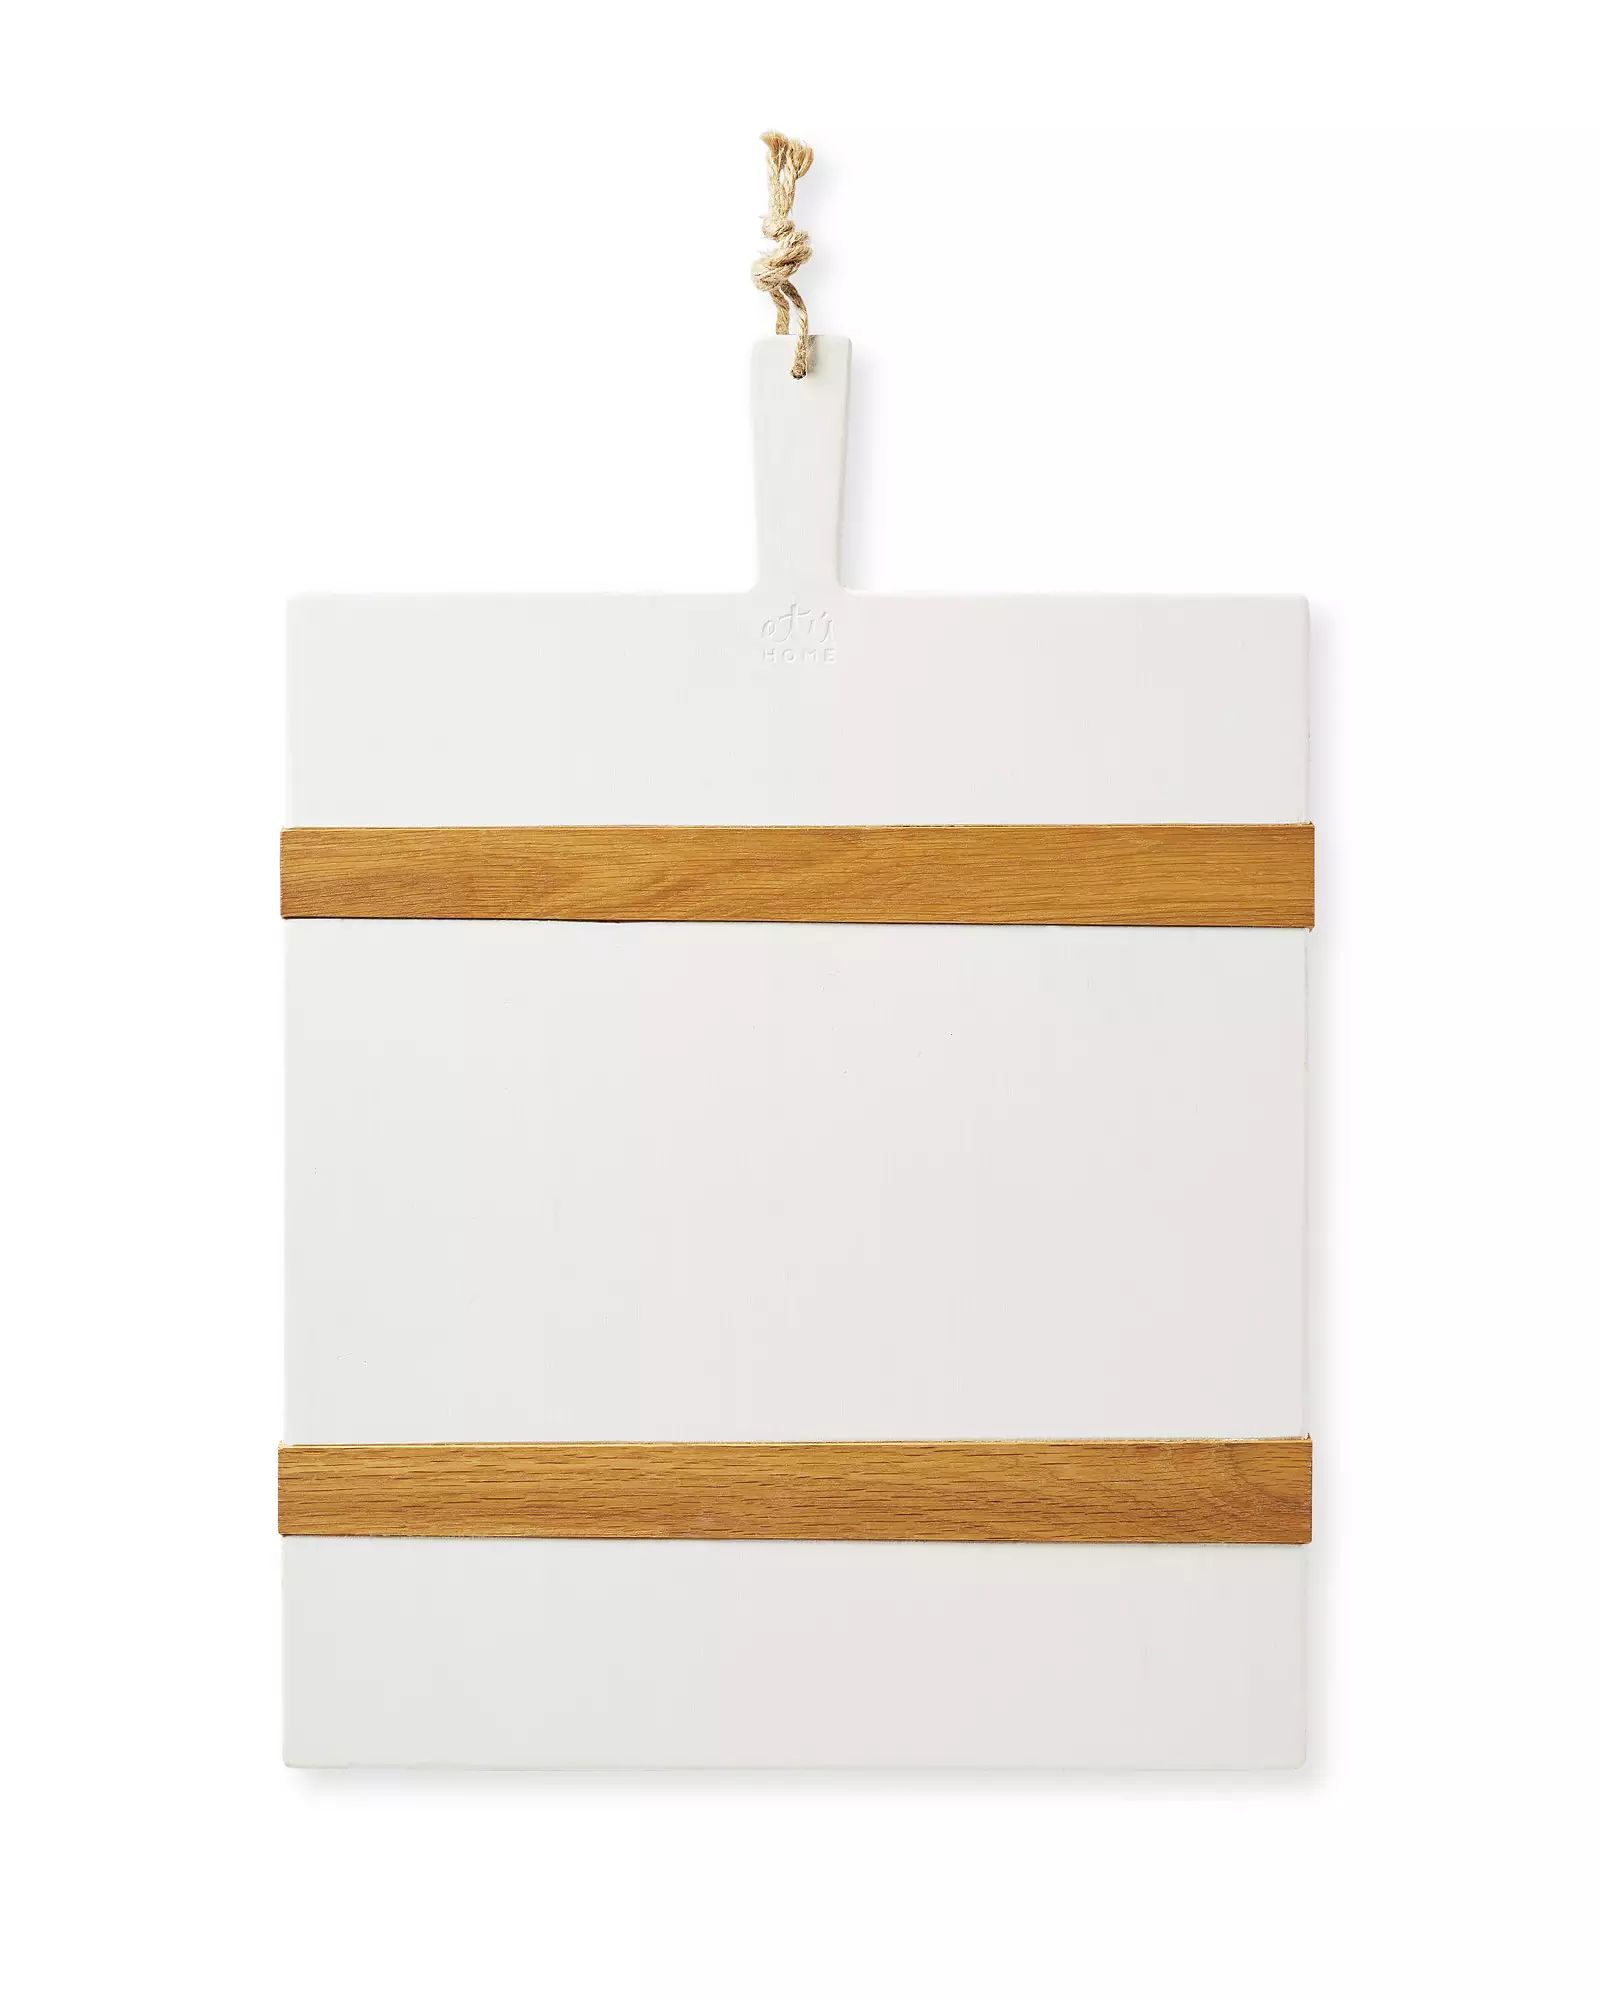 Woodbury Serving Board - White | Serena and Lily